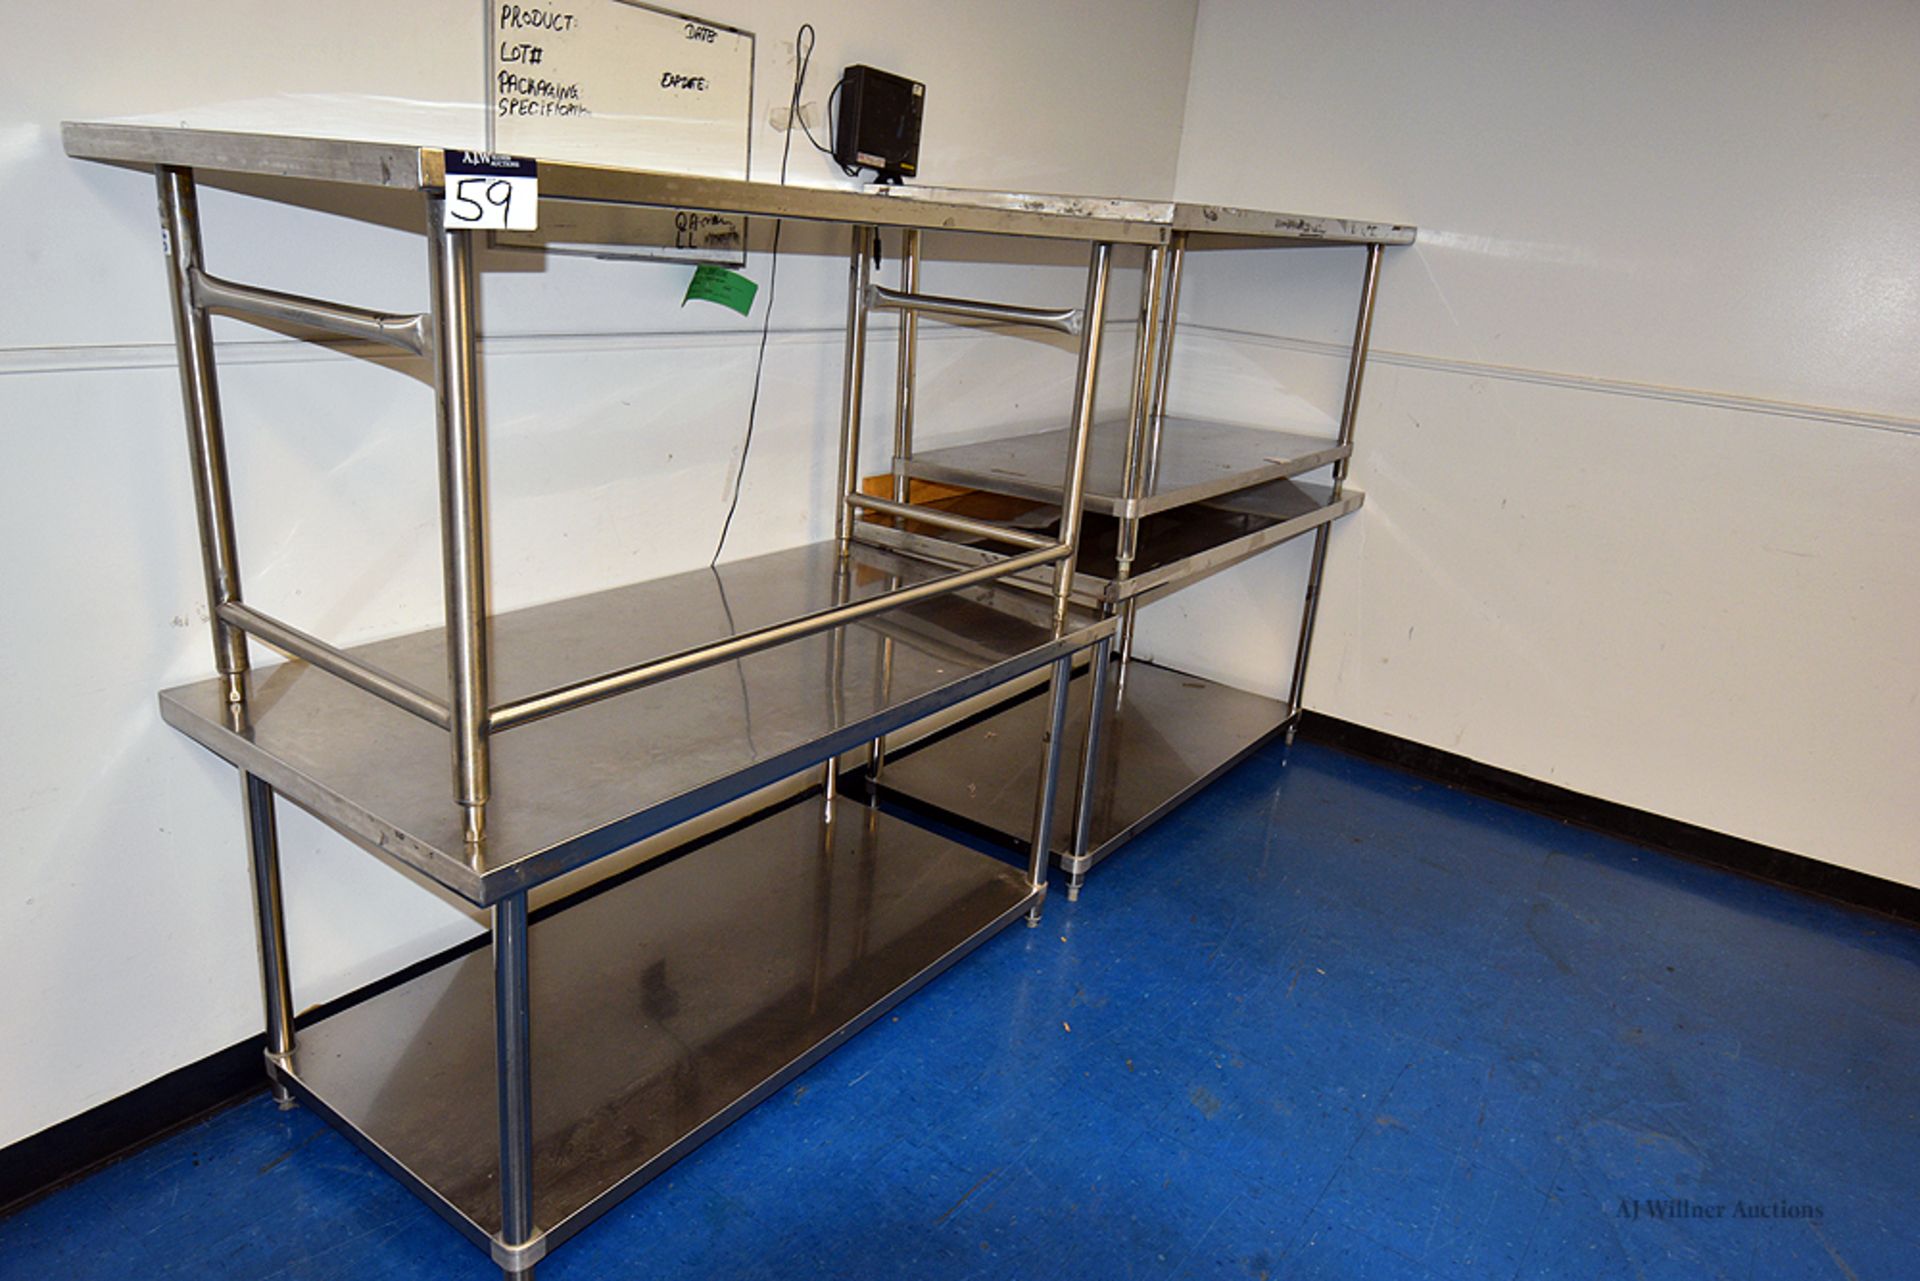 60"x30" Stainless Steel 2-Tier Work Tables - Image 2 of 2